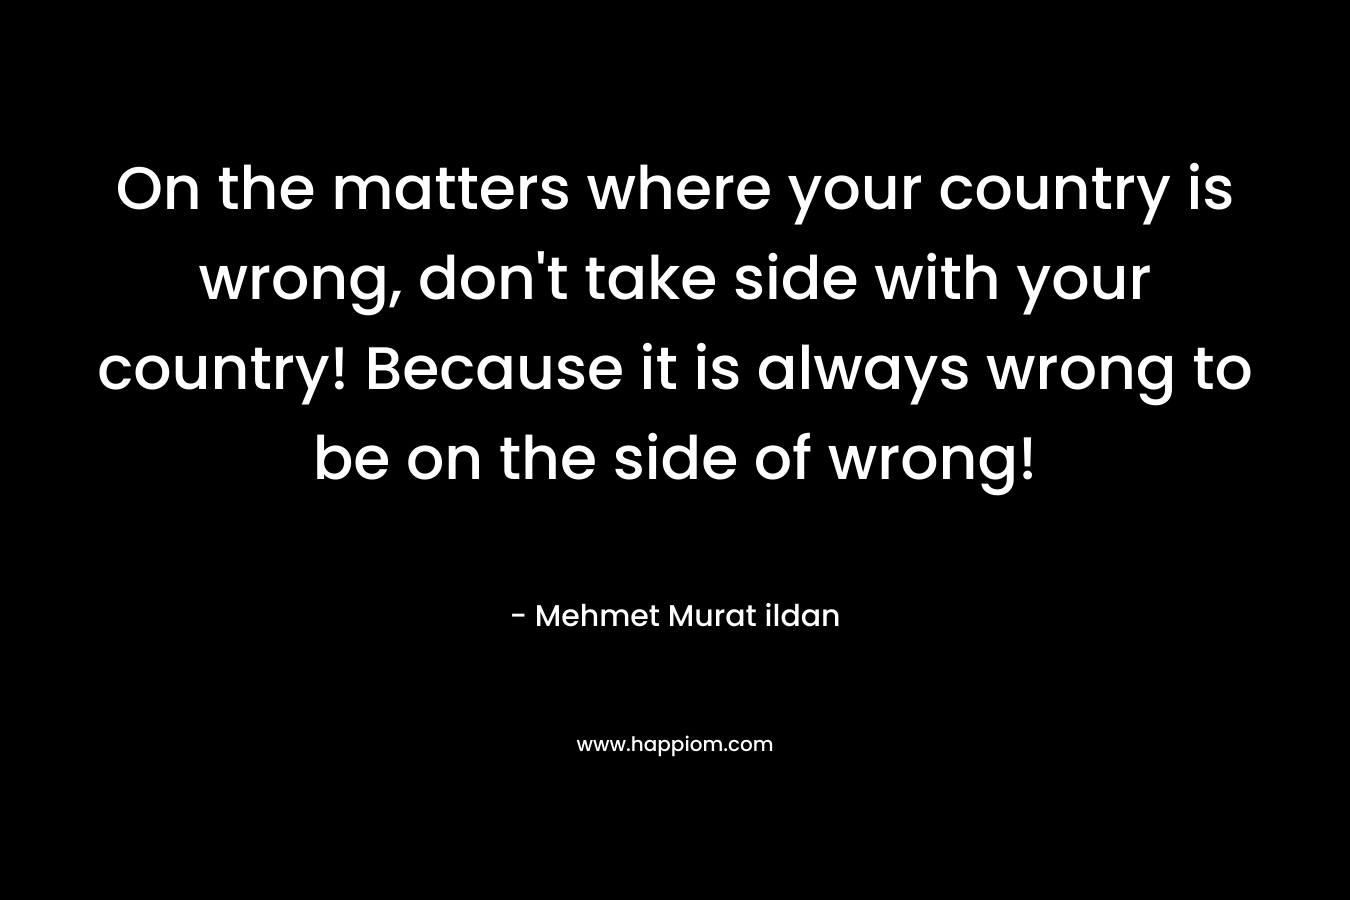 On the matters where your country is wrong, don’t take side with your country! Because it is always wrong to be on the side of wrong! – Mehmet Murat ildan